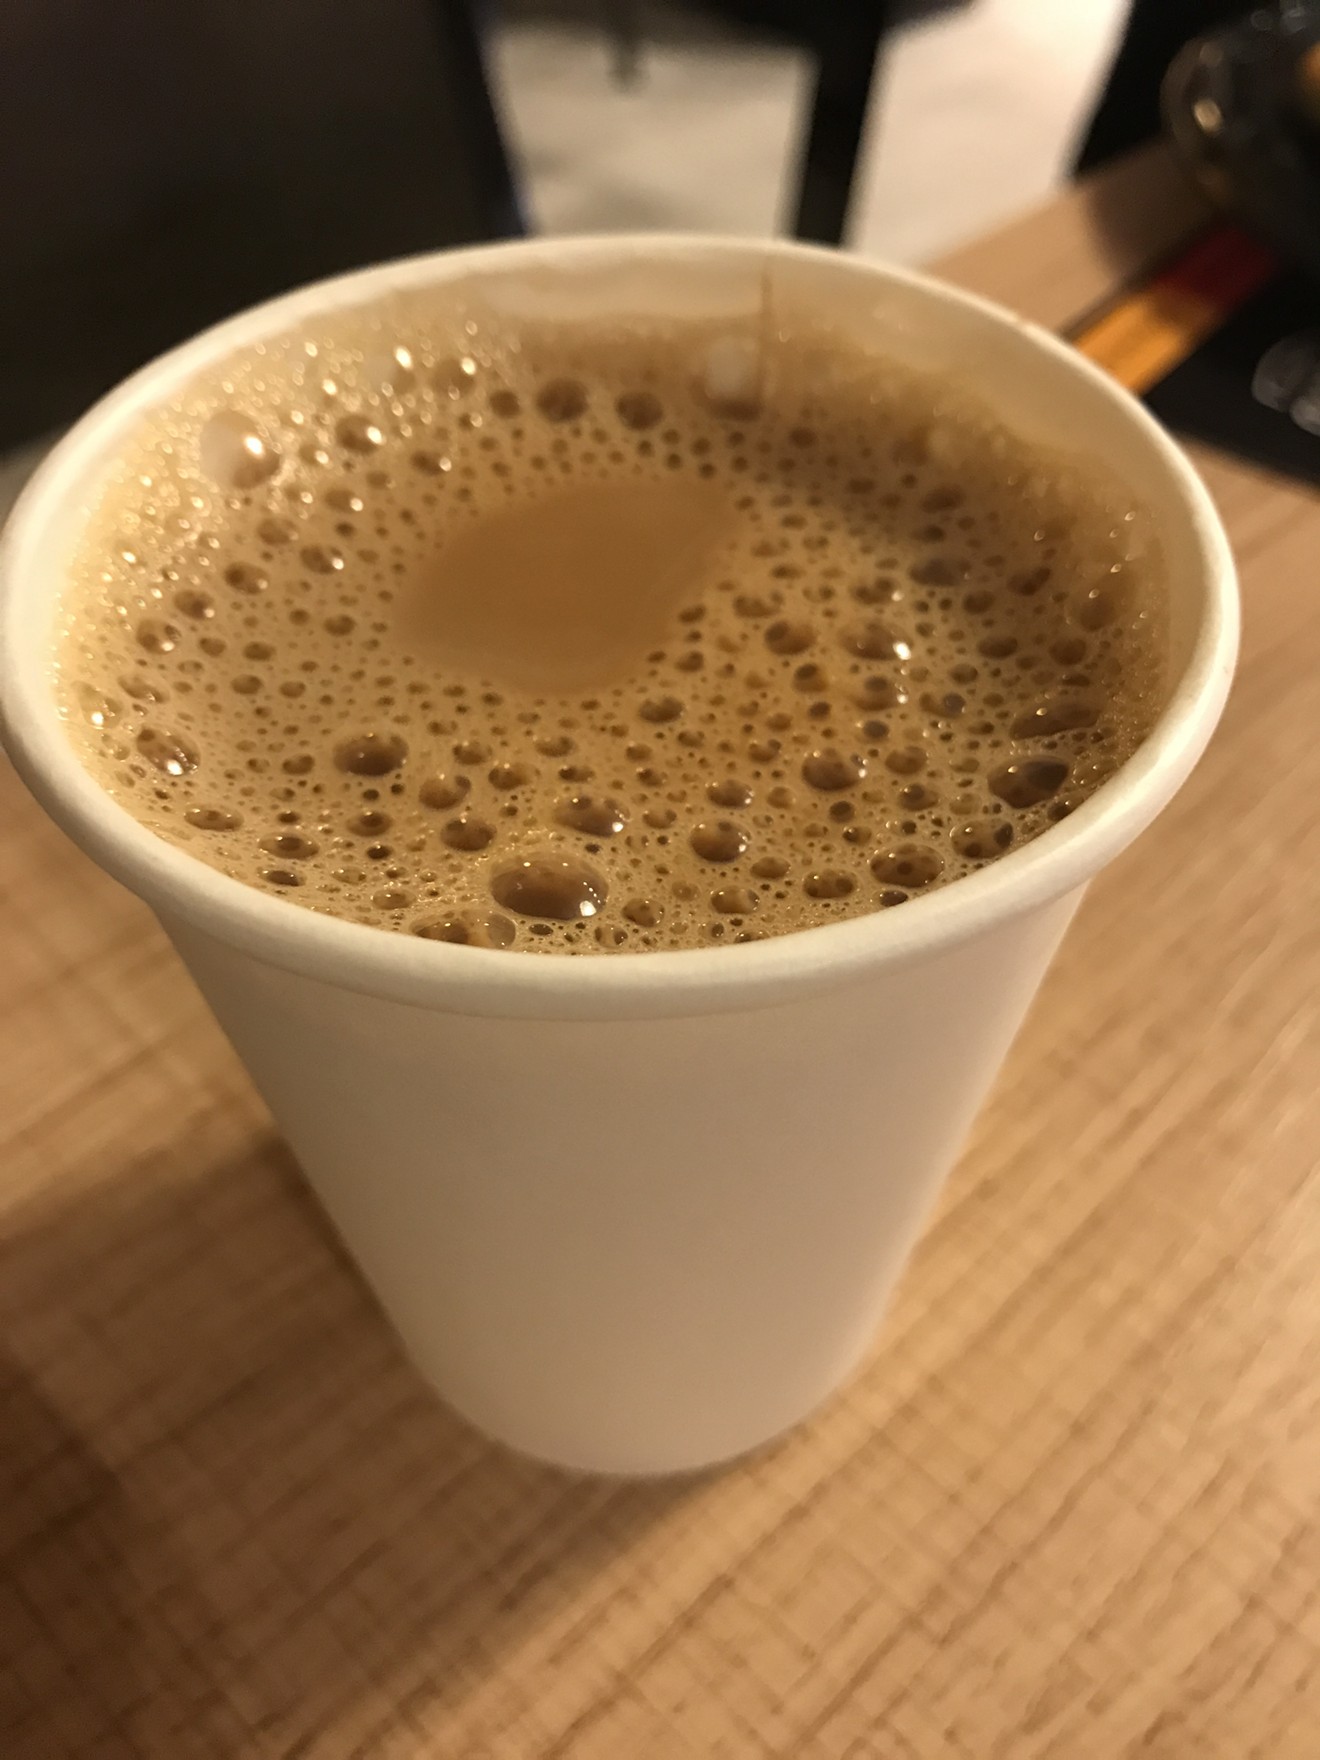 Don't let the styrofoam cup fool you. This is THE Indian chai you've been waiting for.